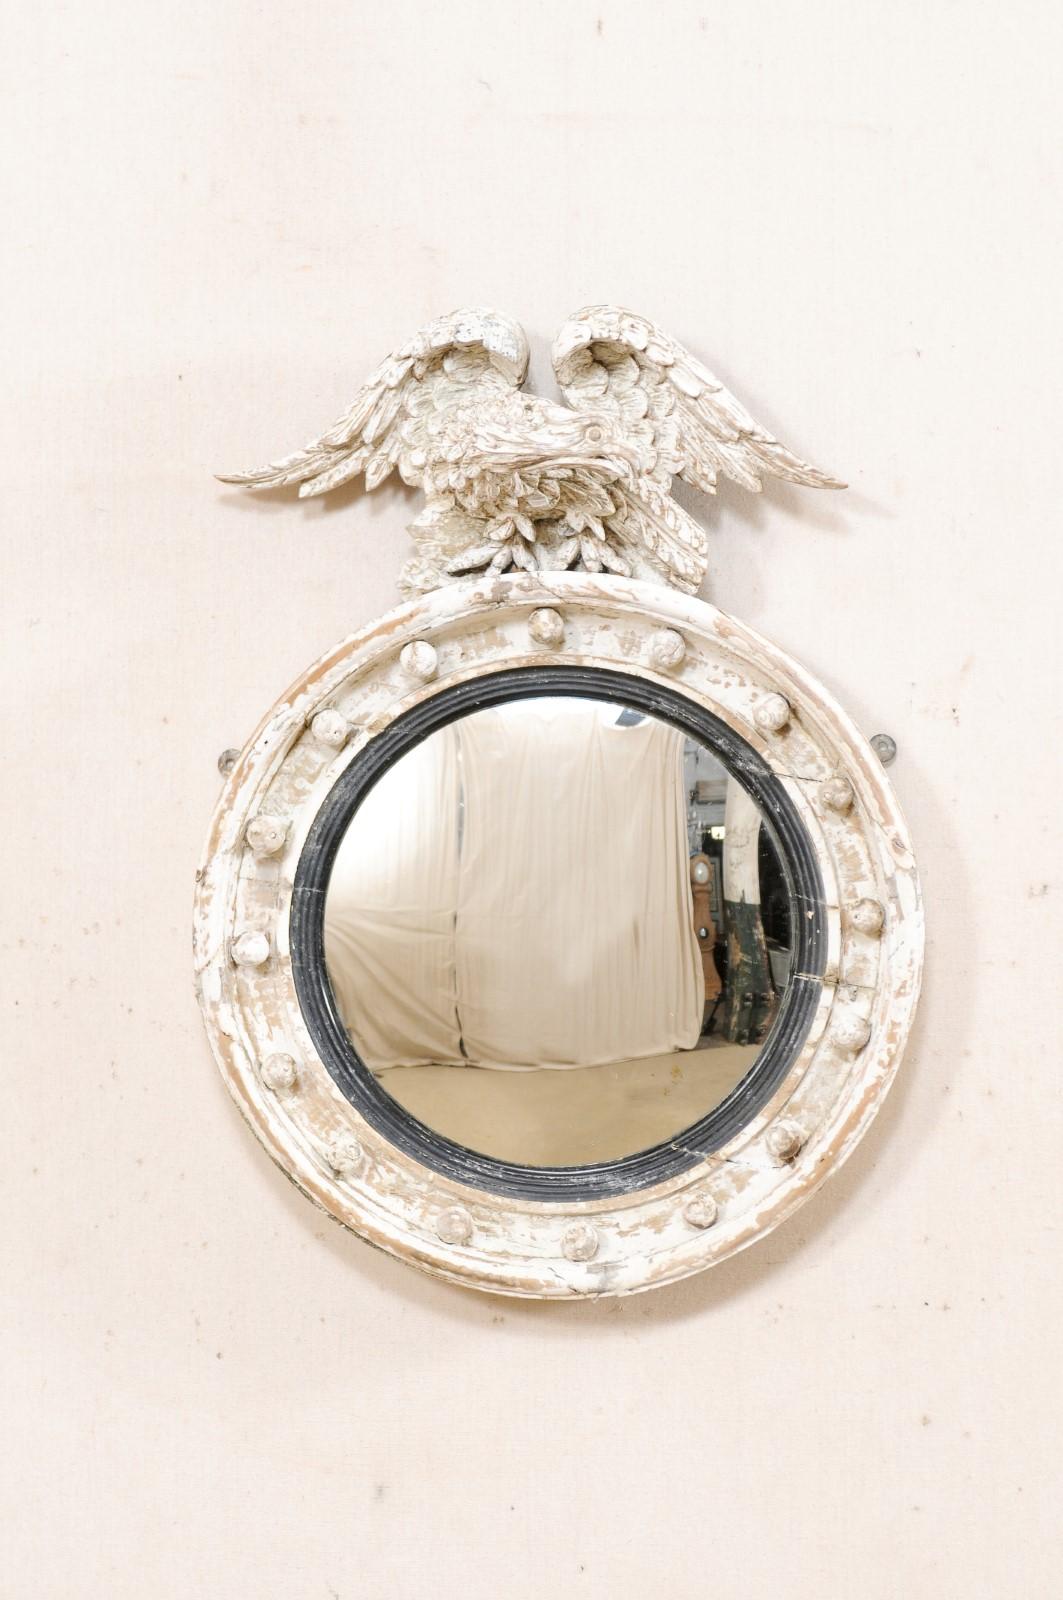 Crest Shaped Mirror - For Sale on 1stDibs | beaded mirror